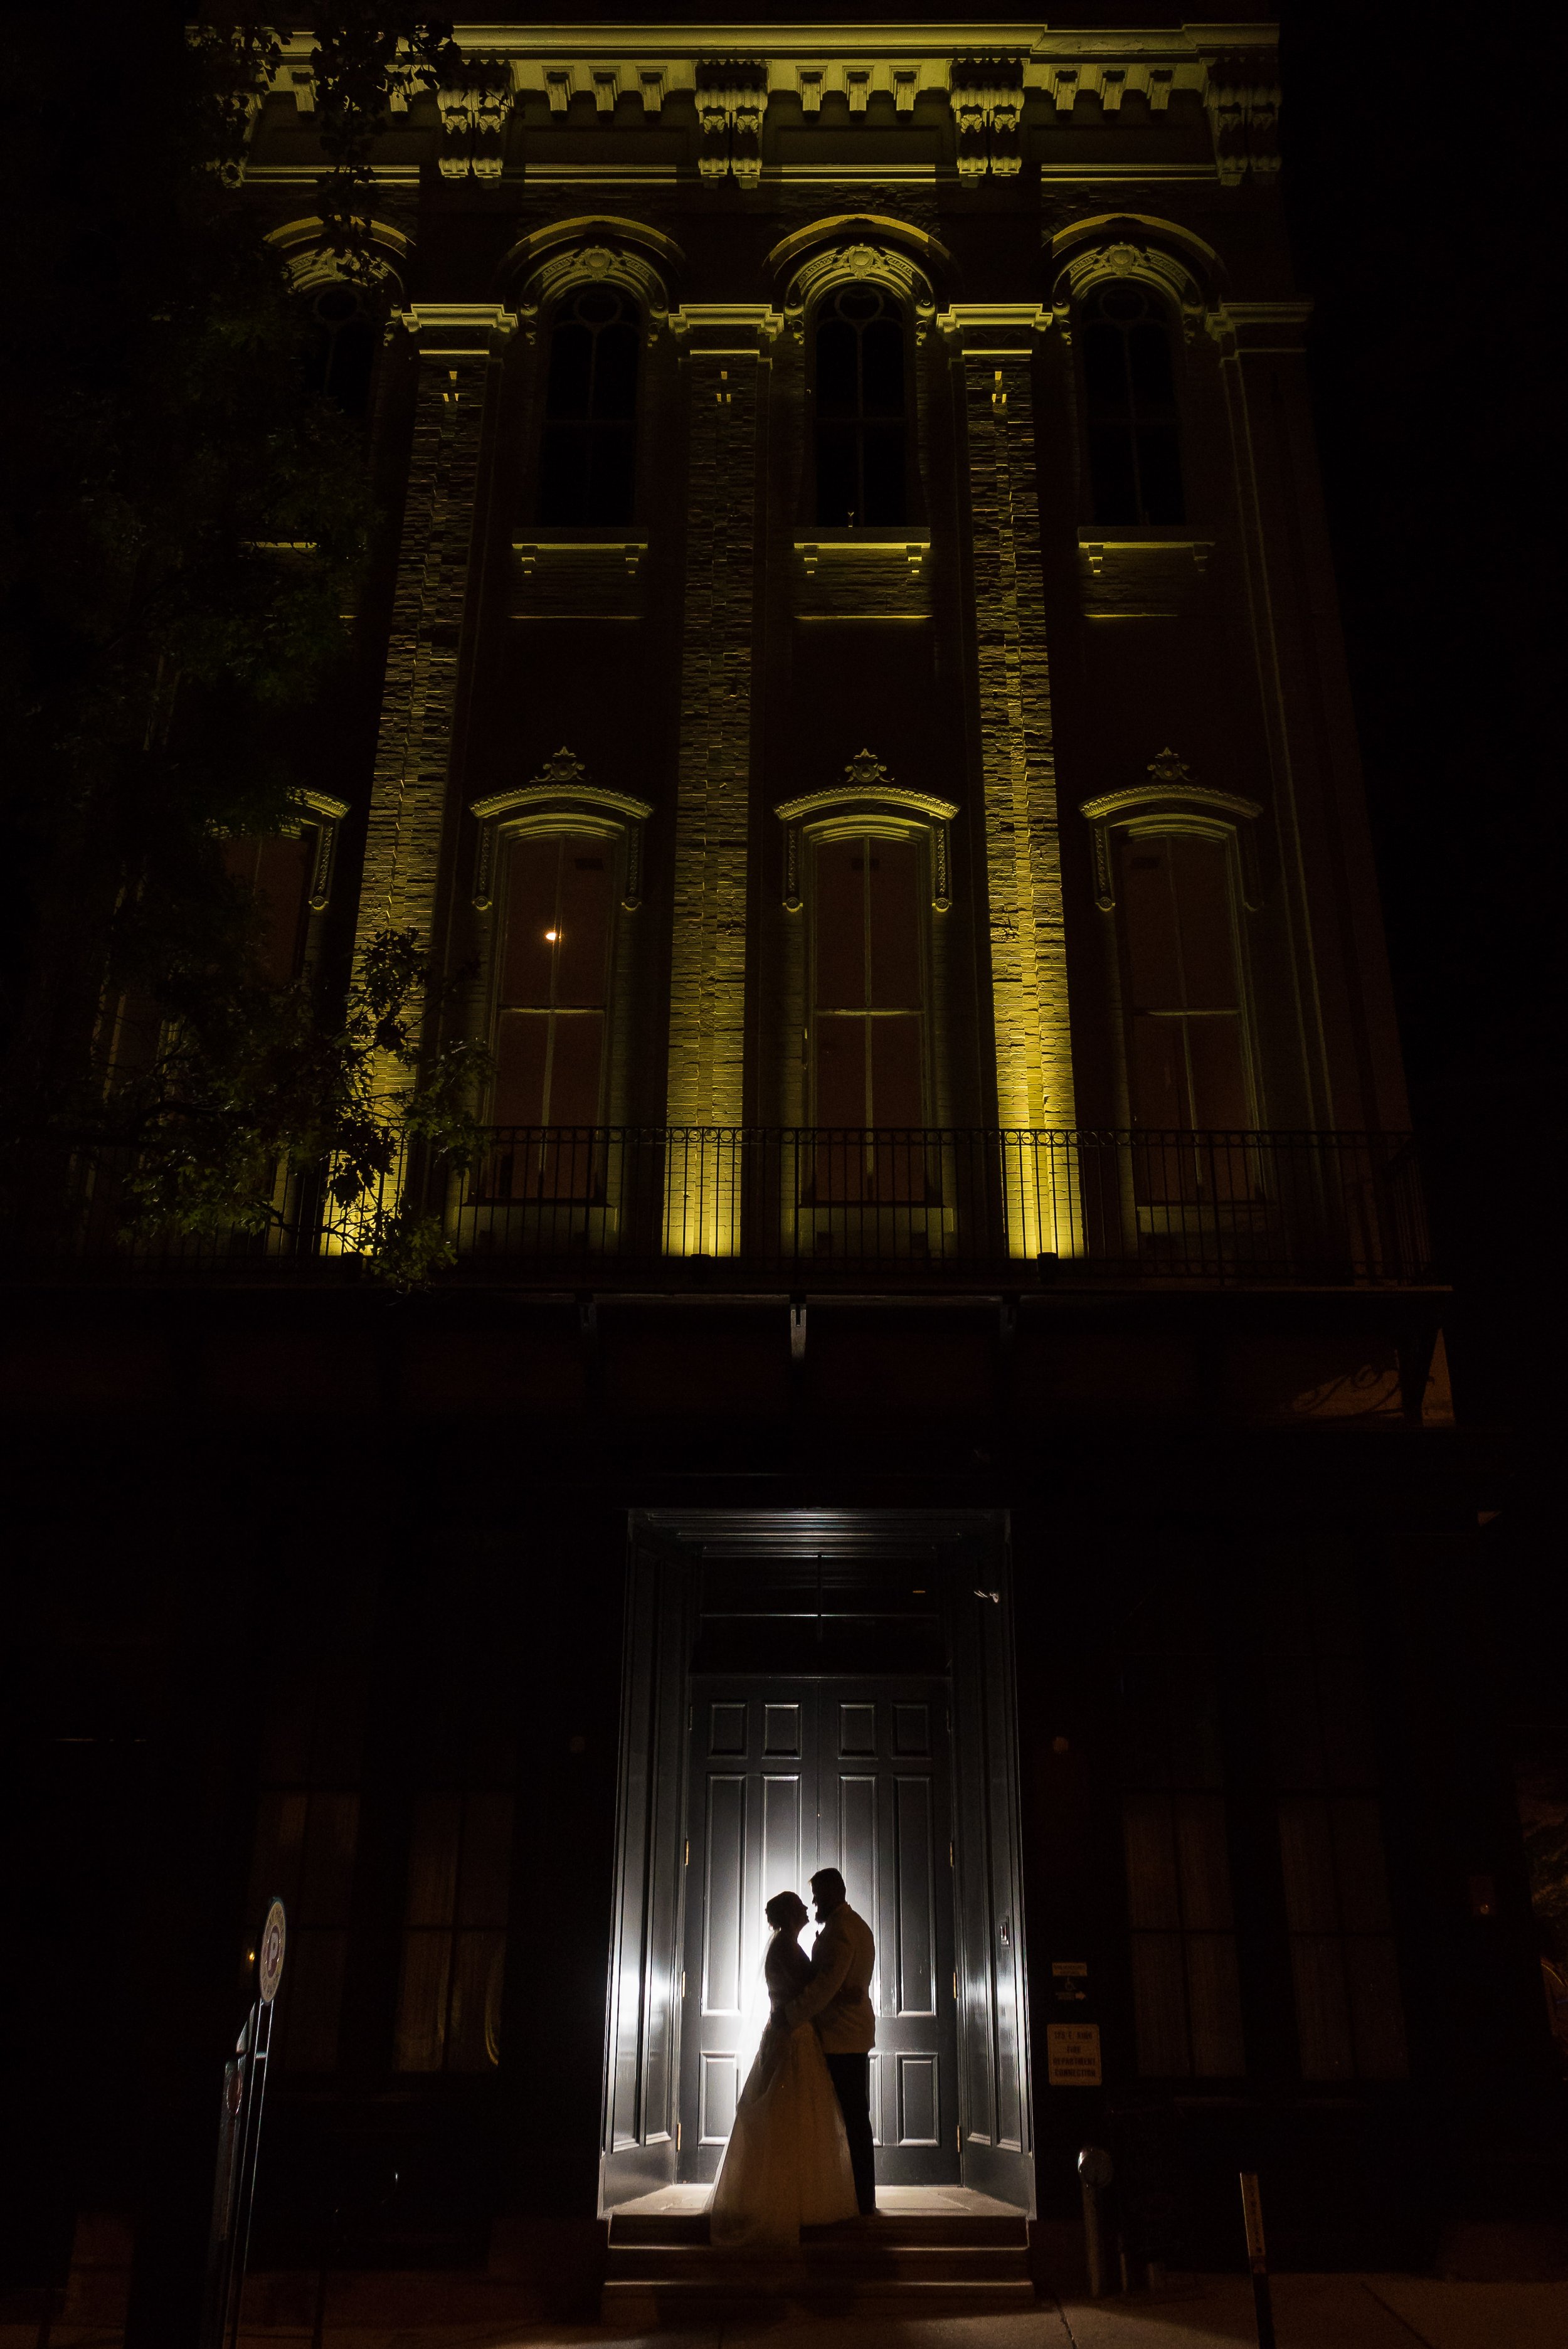 Bride and groom dramatically lit up against dark Excelsior facade